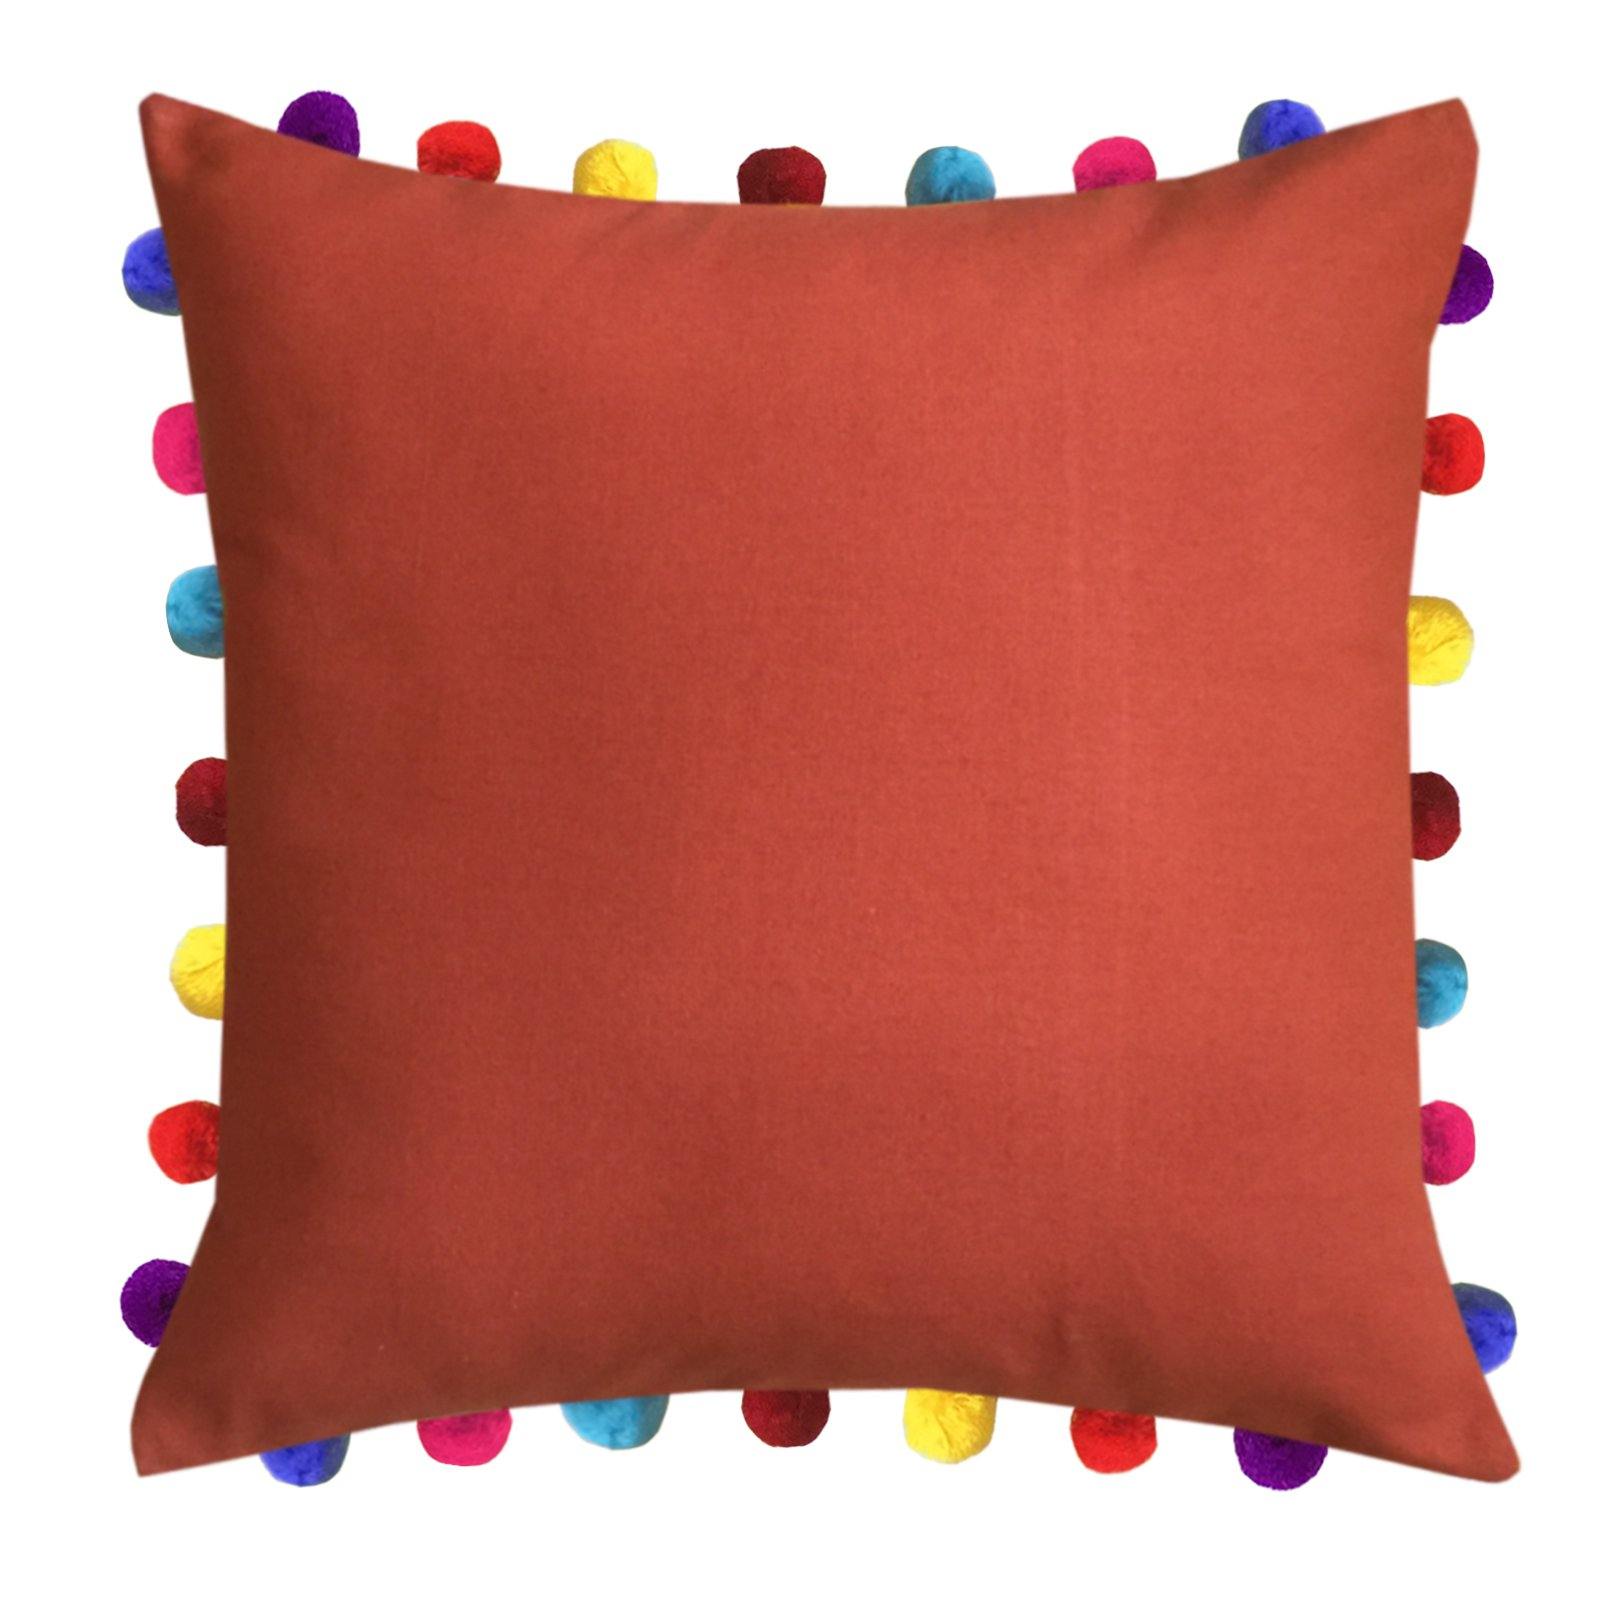 Lushomes Red Wood Cushion Cover with Colorful Pom Poms (Single pc, 20 x 20”) - Lushomes